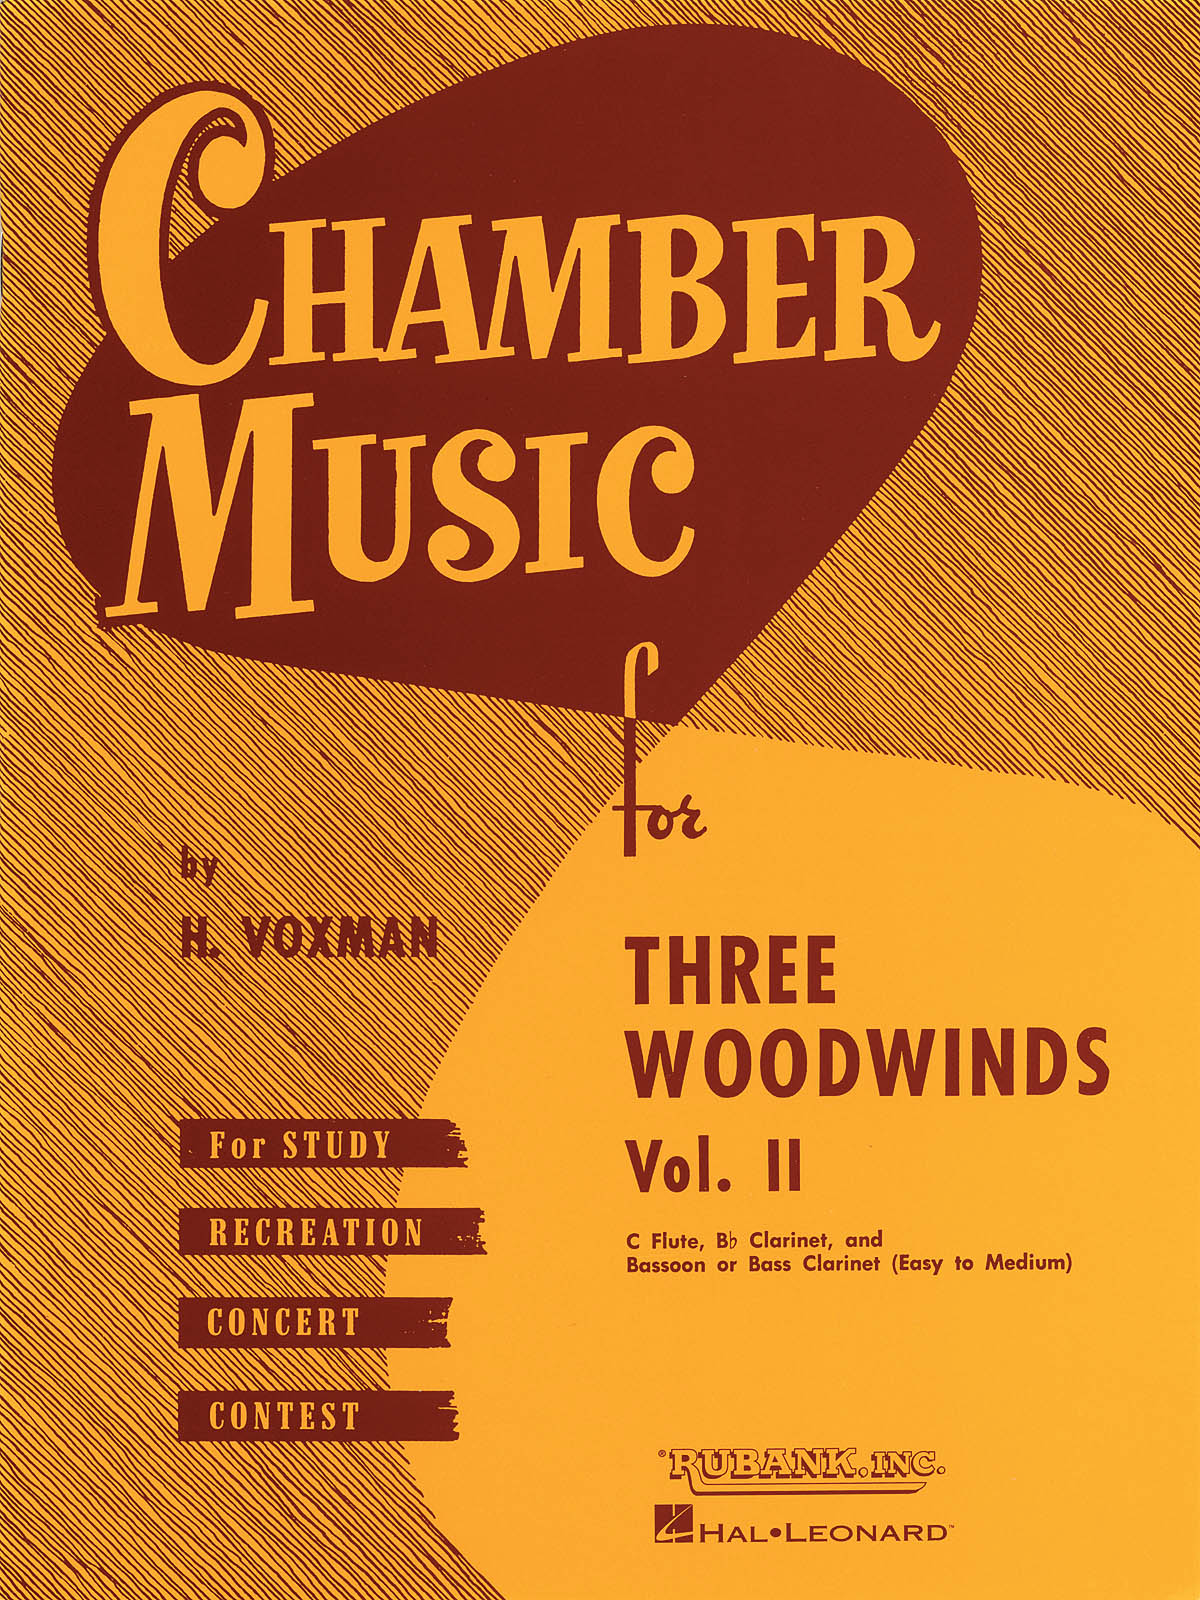 Chamber Music for Three Woodwinds  Vol. 2: Woodwind Ensemble: Part